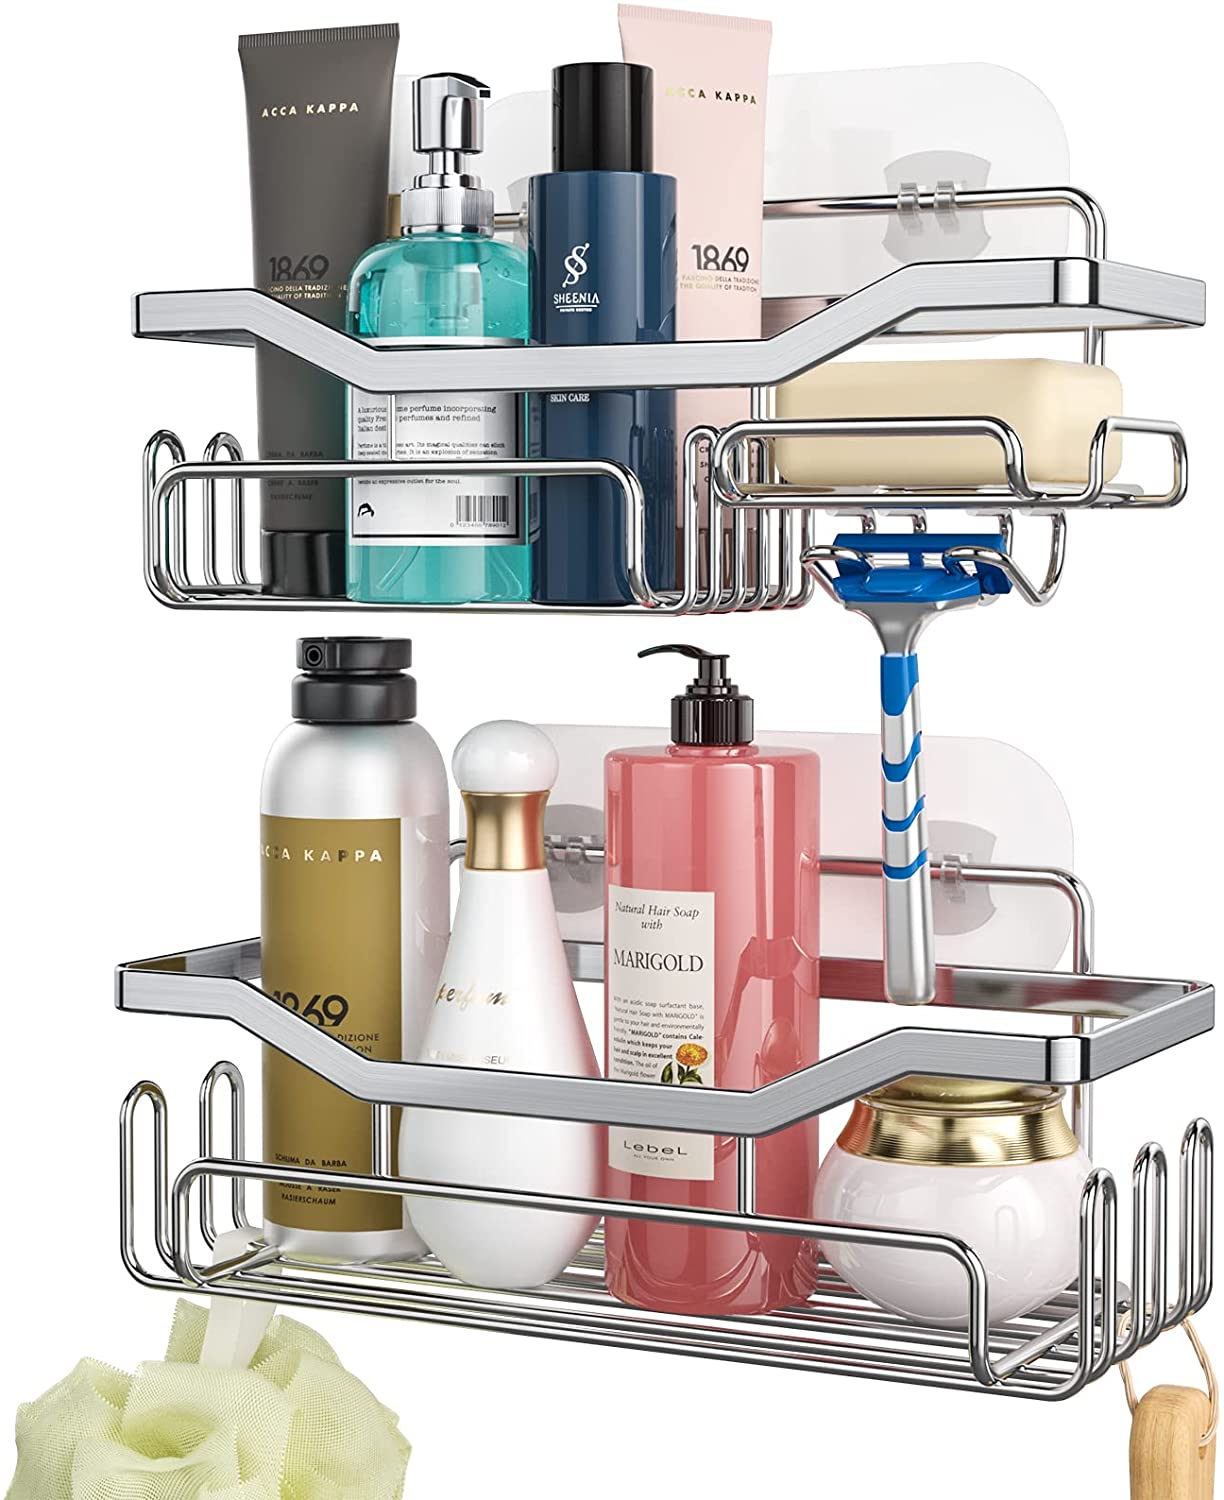 https://www.dontwasteyourmoney.com/wp-content/uploads/2022/03/hapirm-stainless-steel-shower-caddy-with-hooks-2-pack-shower-caddy-with-hooks.jpg